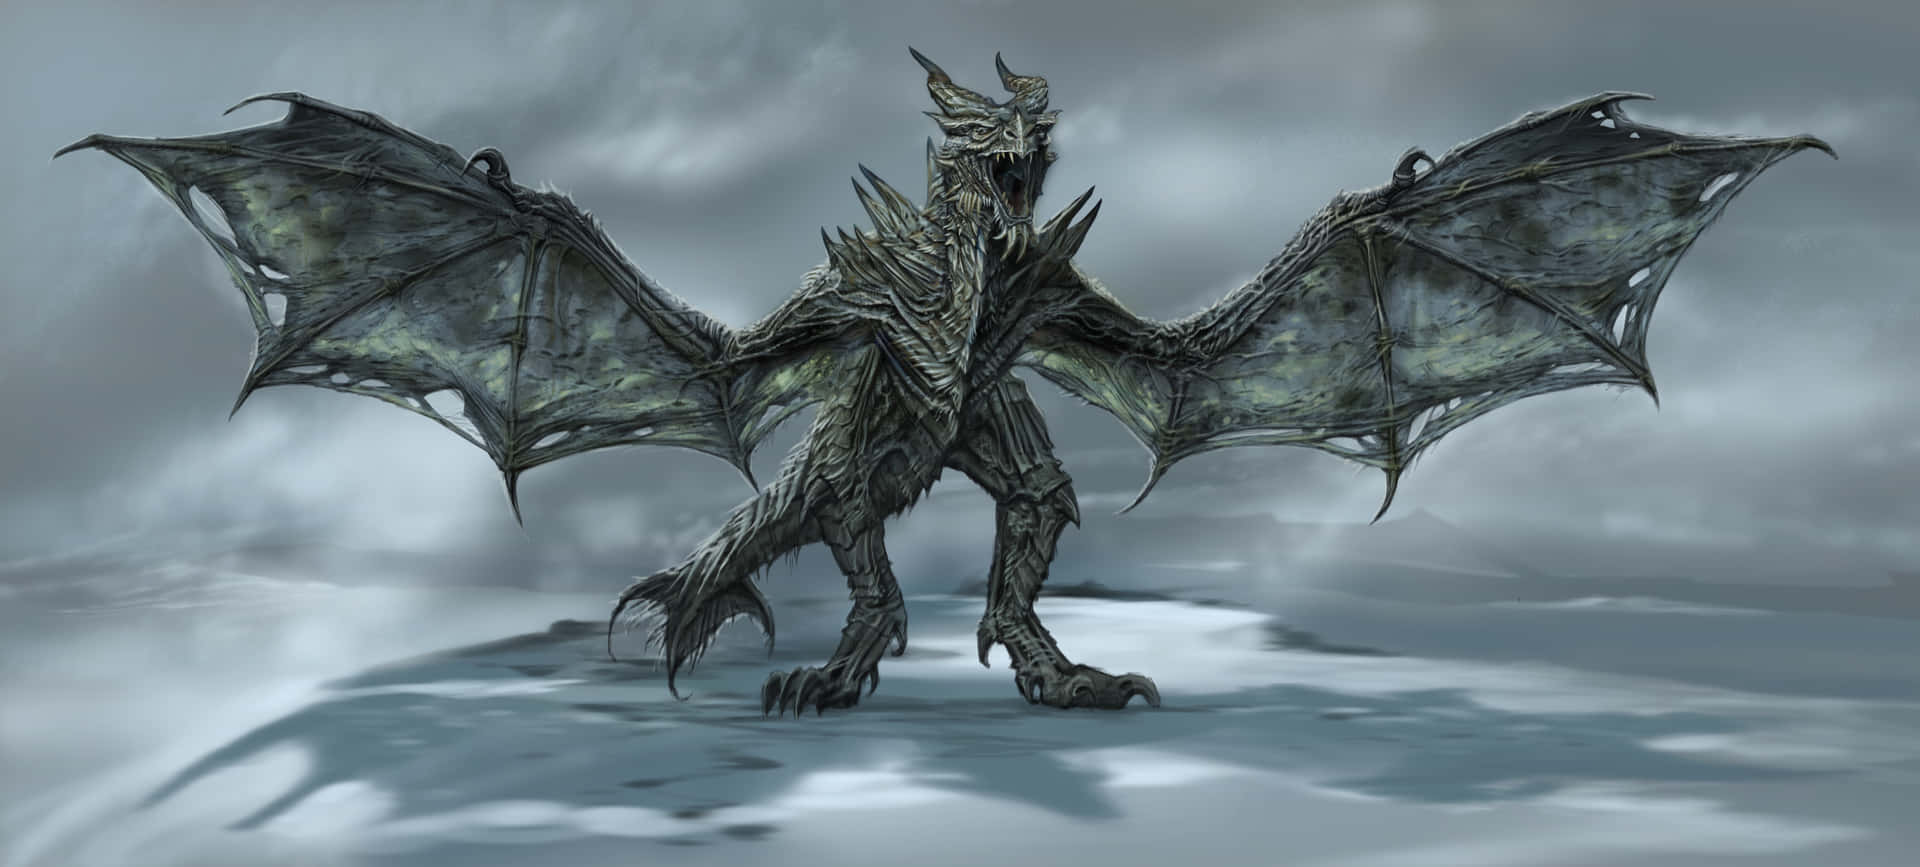 The Wise Dragon Paarthurnax in the Iconic Skyrim Landscape Wallpaper